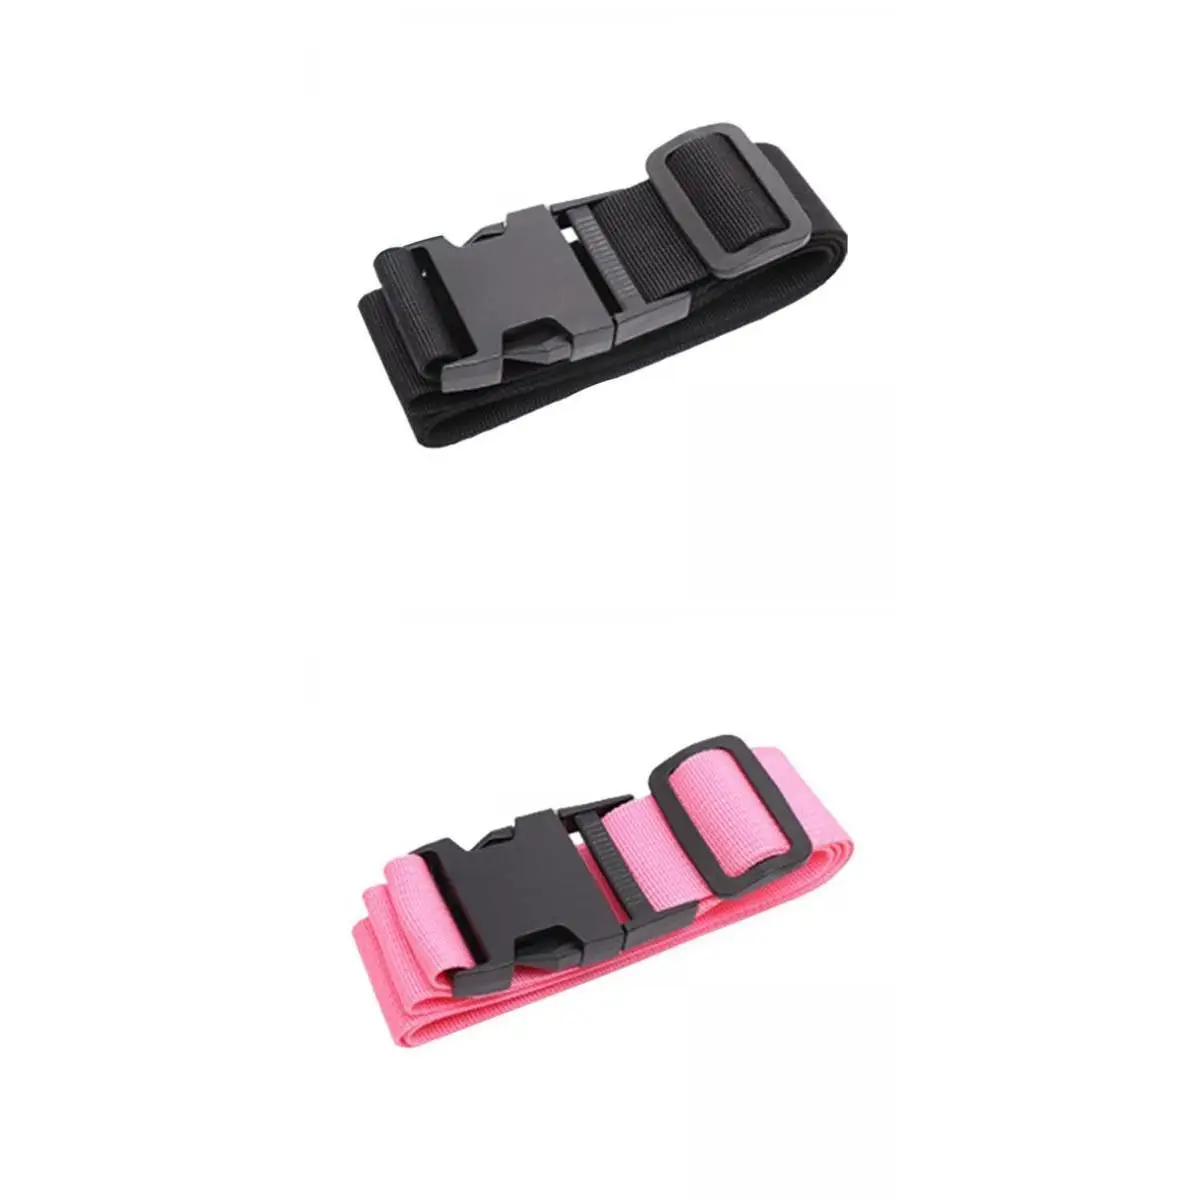 2pcs Luggage Lashing Straps Roof Rack Carrier Baggage Suitcase Tie Down Belts